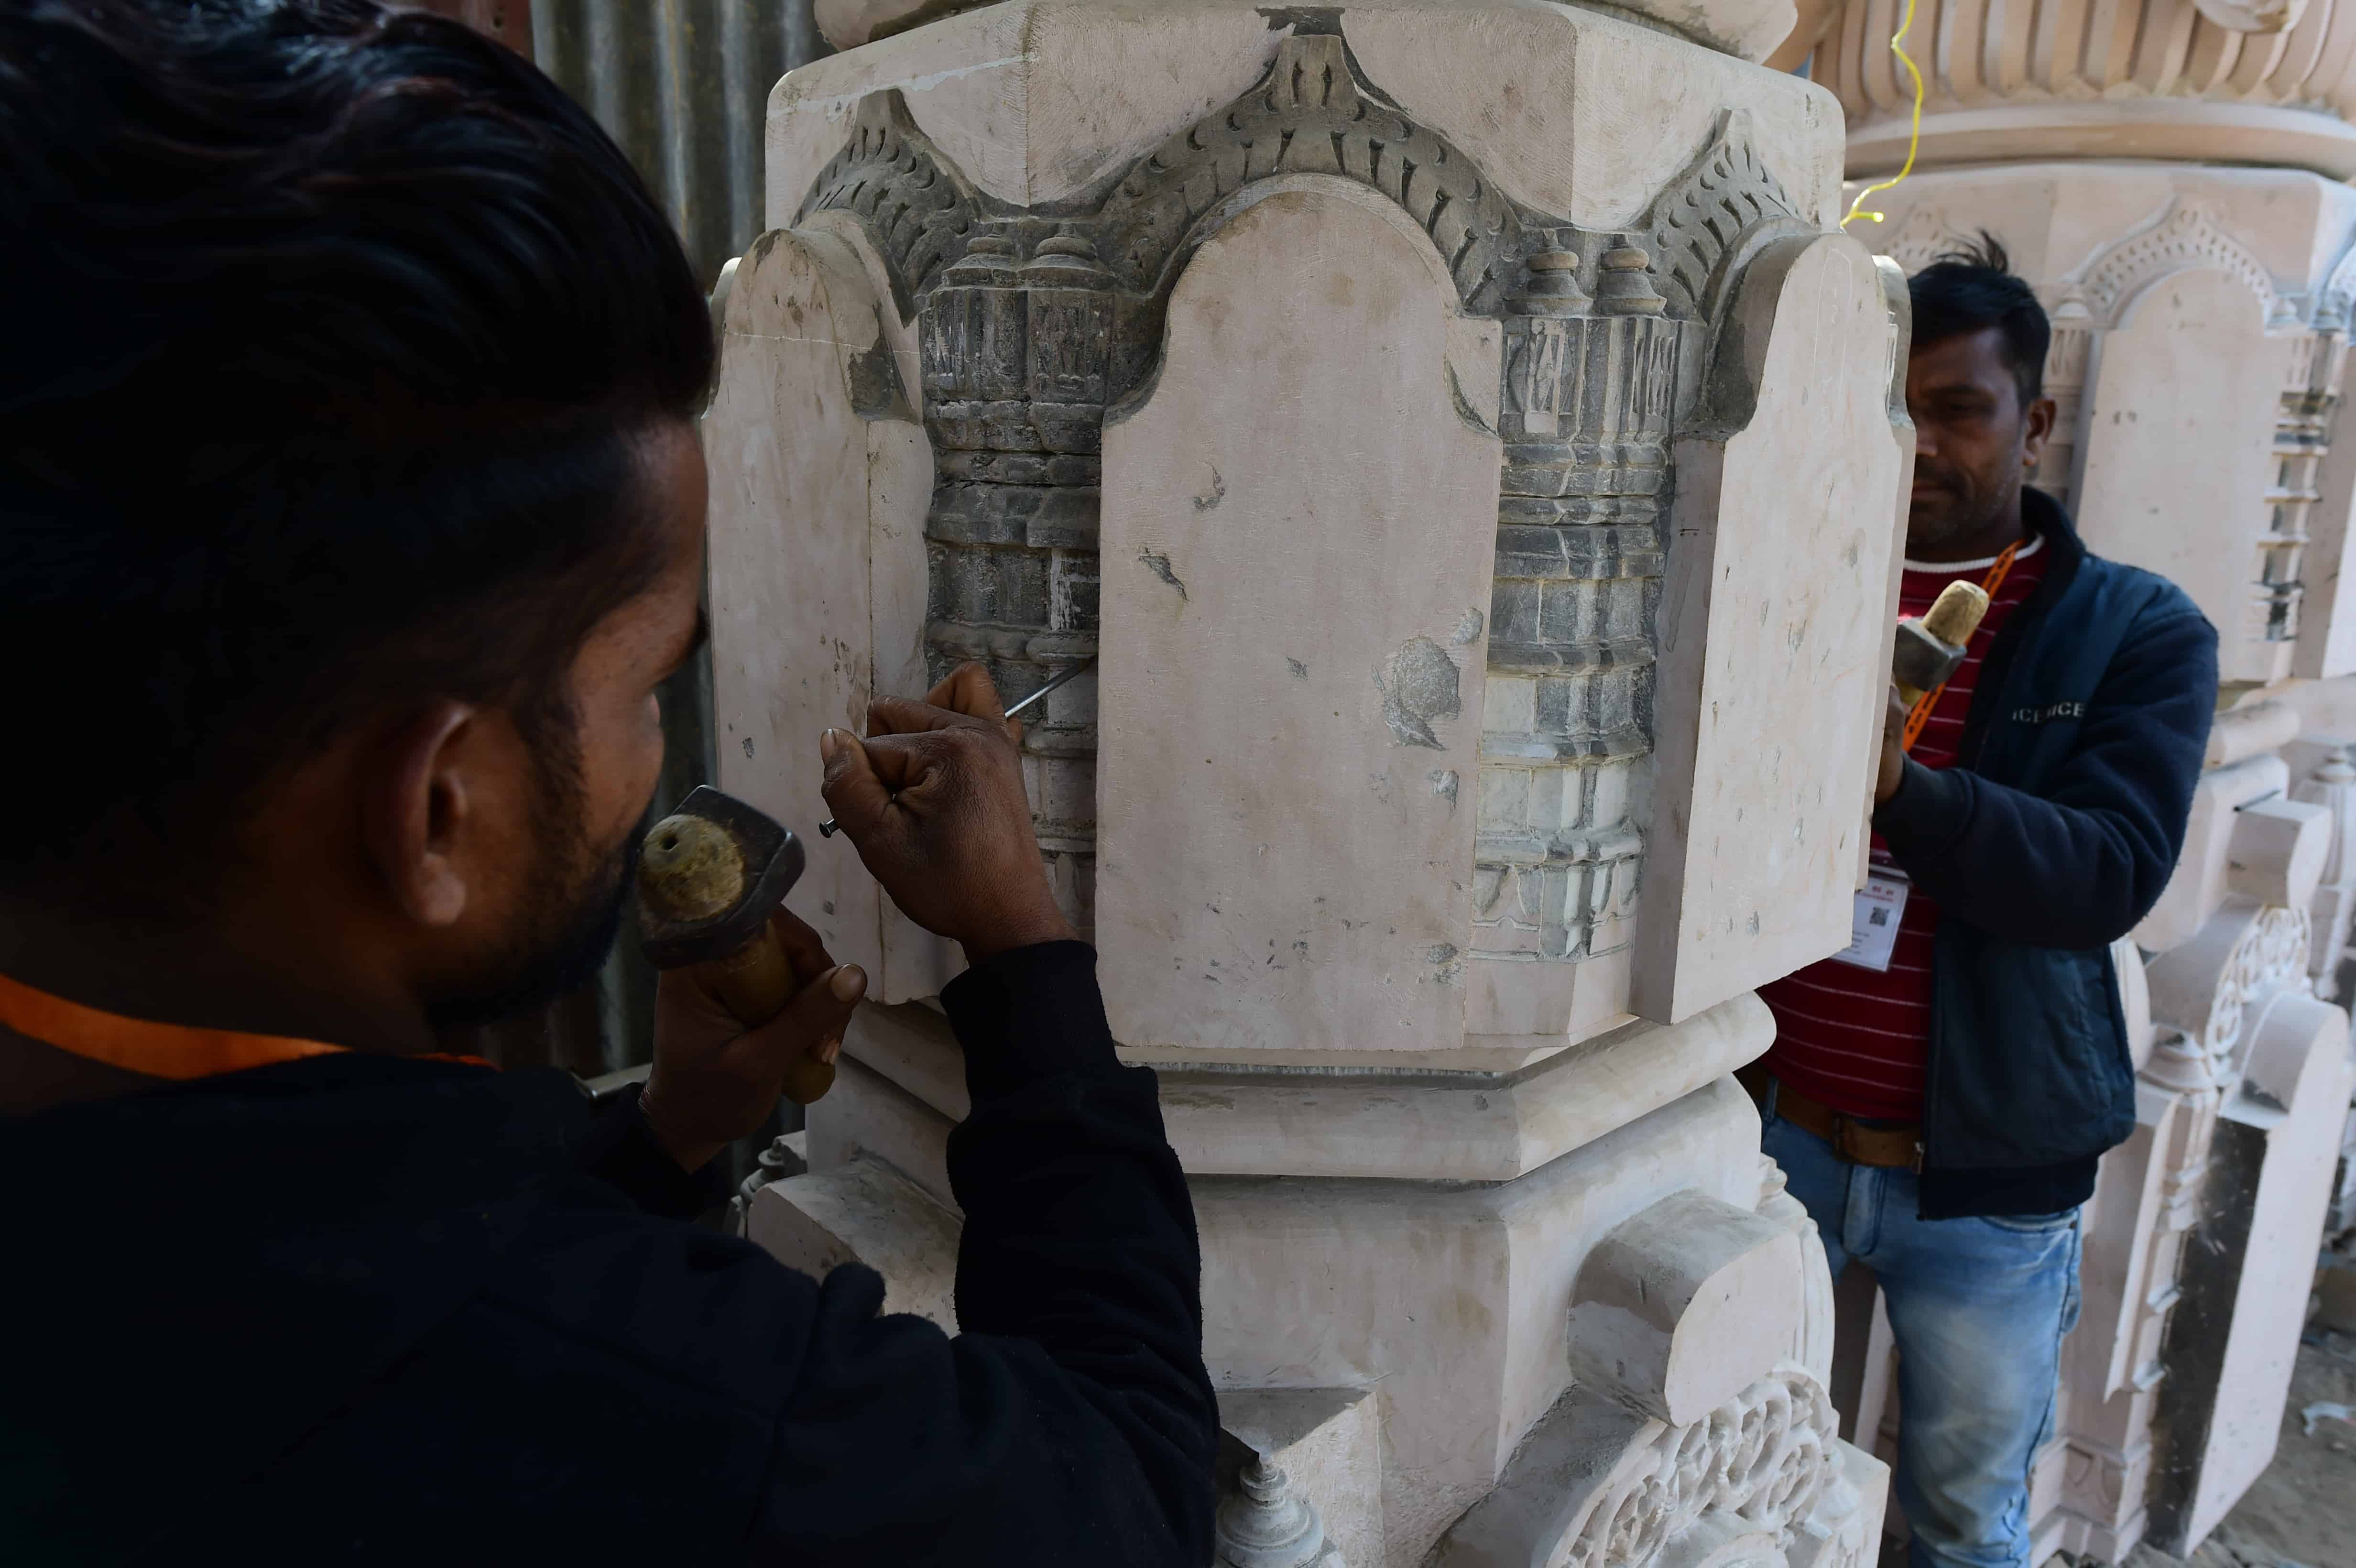 India: Modi Leads Consecration of Controversial Hindu Temple